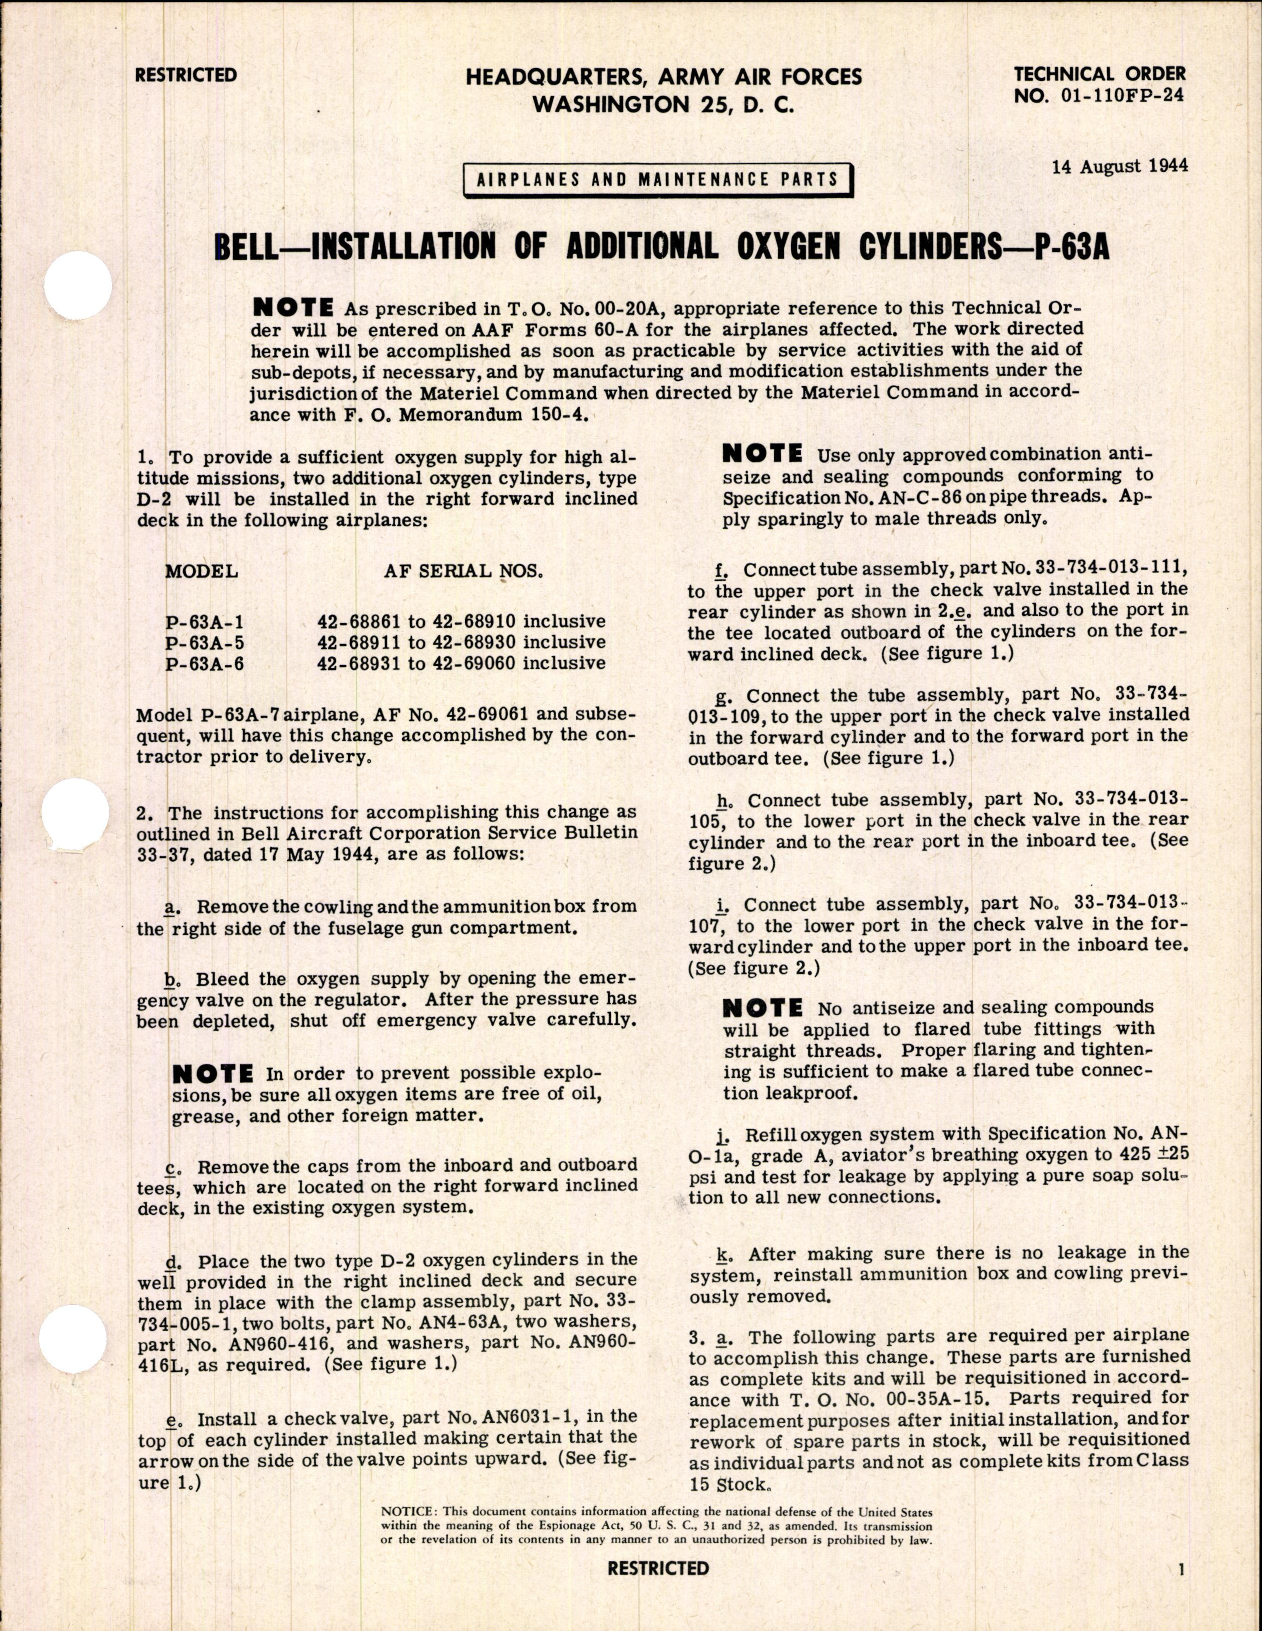 Sample page 1 from AirCorps Library document: Installation of Additional Oxygen Cylinders for P-63A